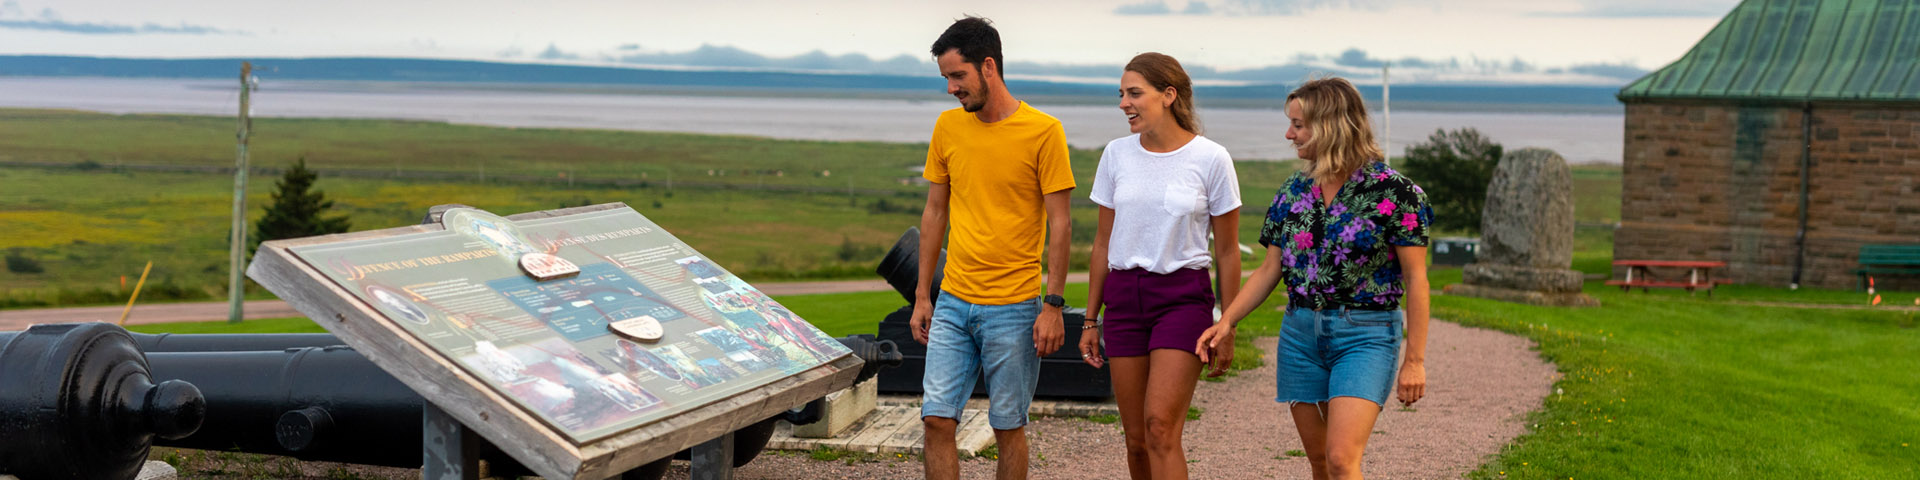 Visitors looking at an interpretation panel outside the fort, with old cannons on display nearby.